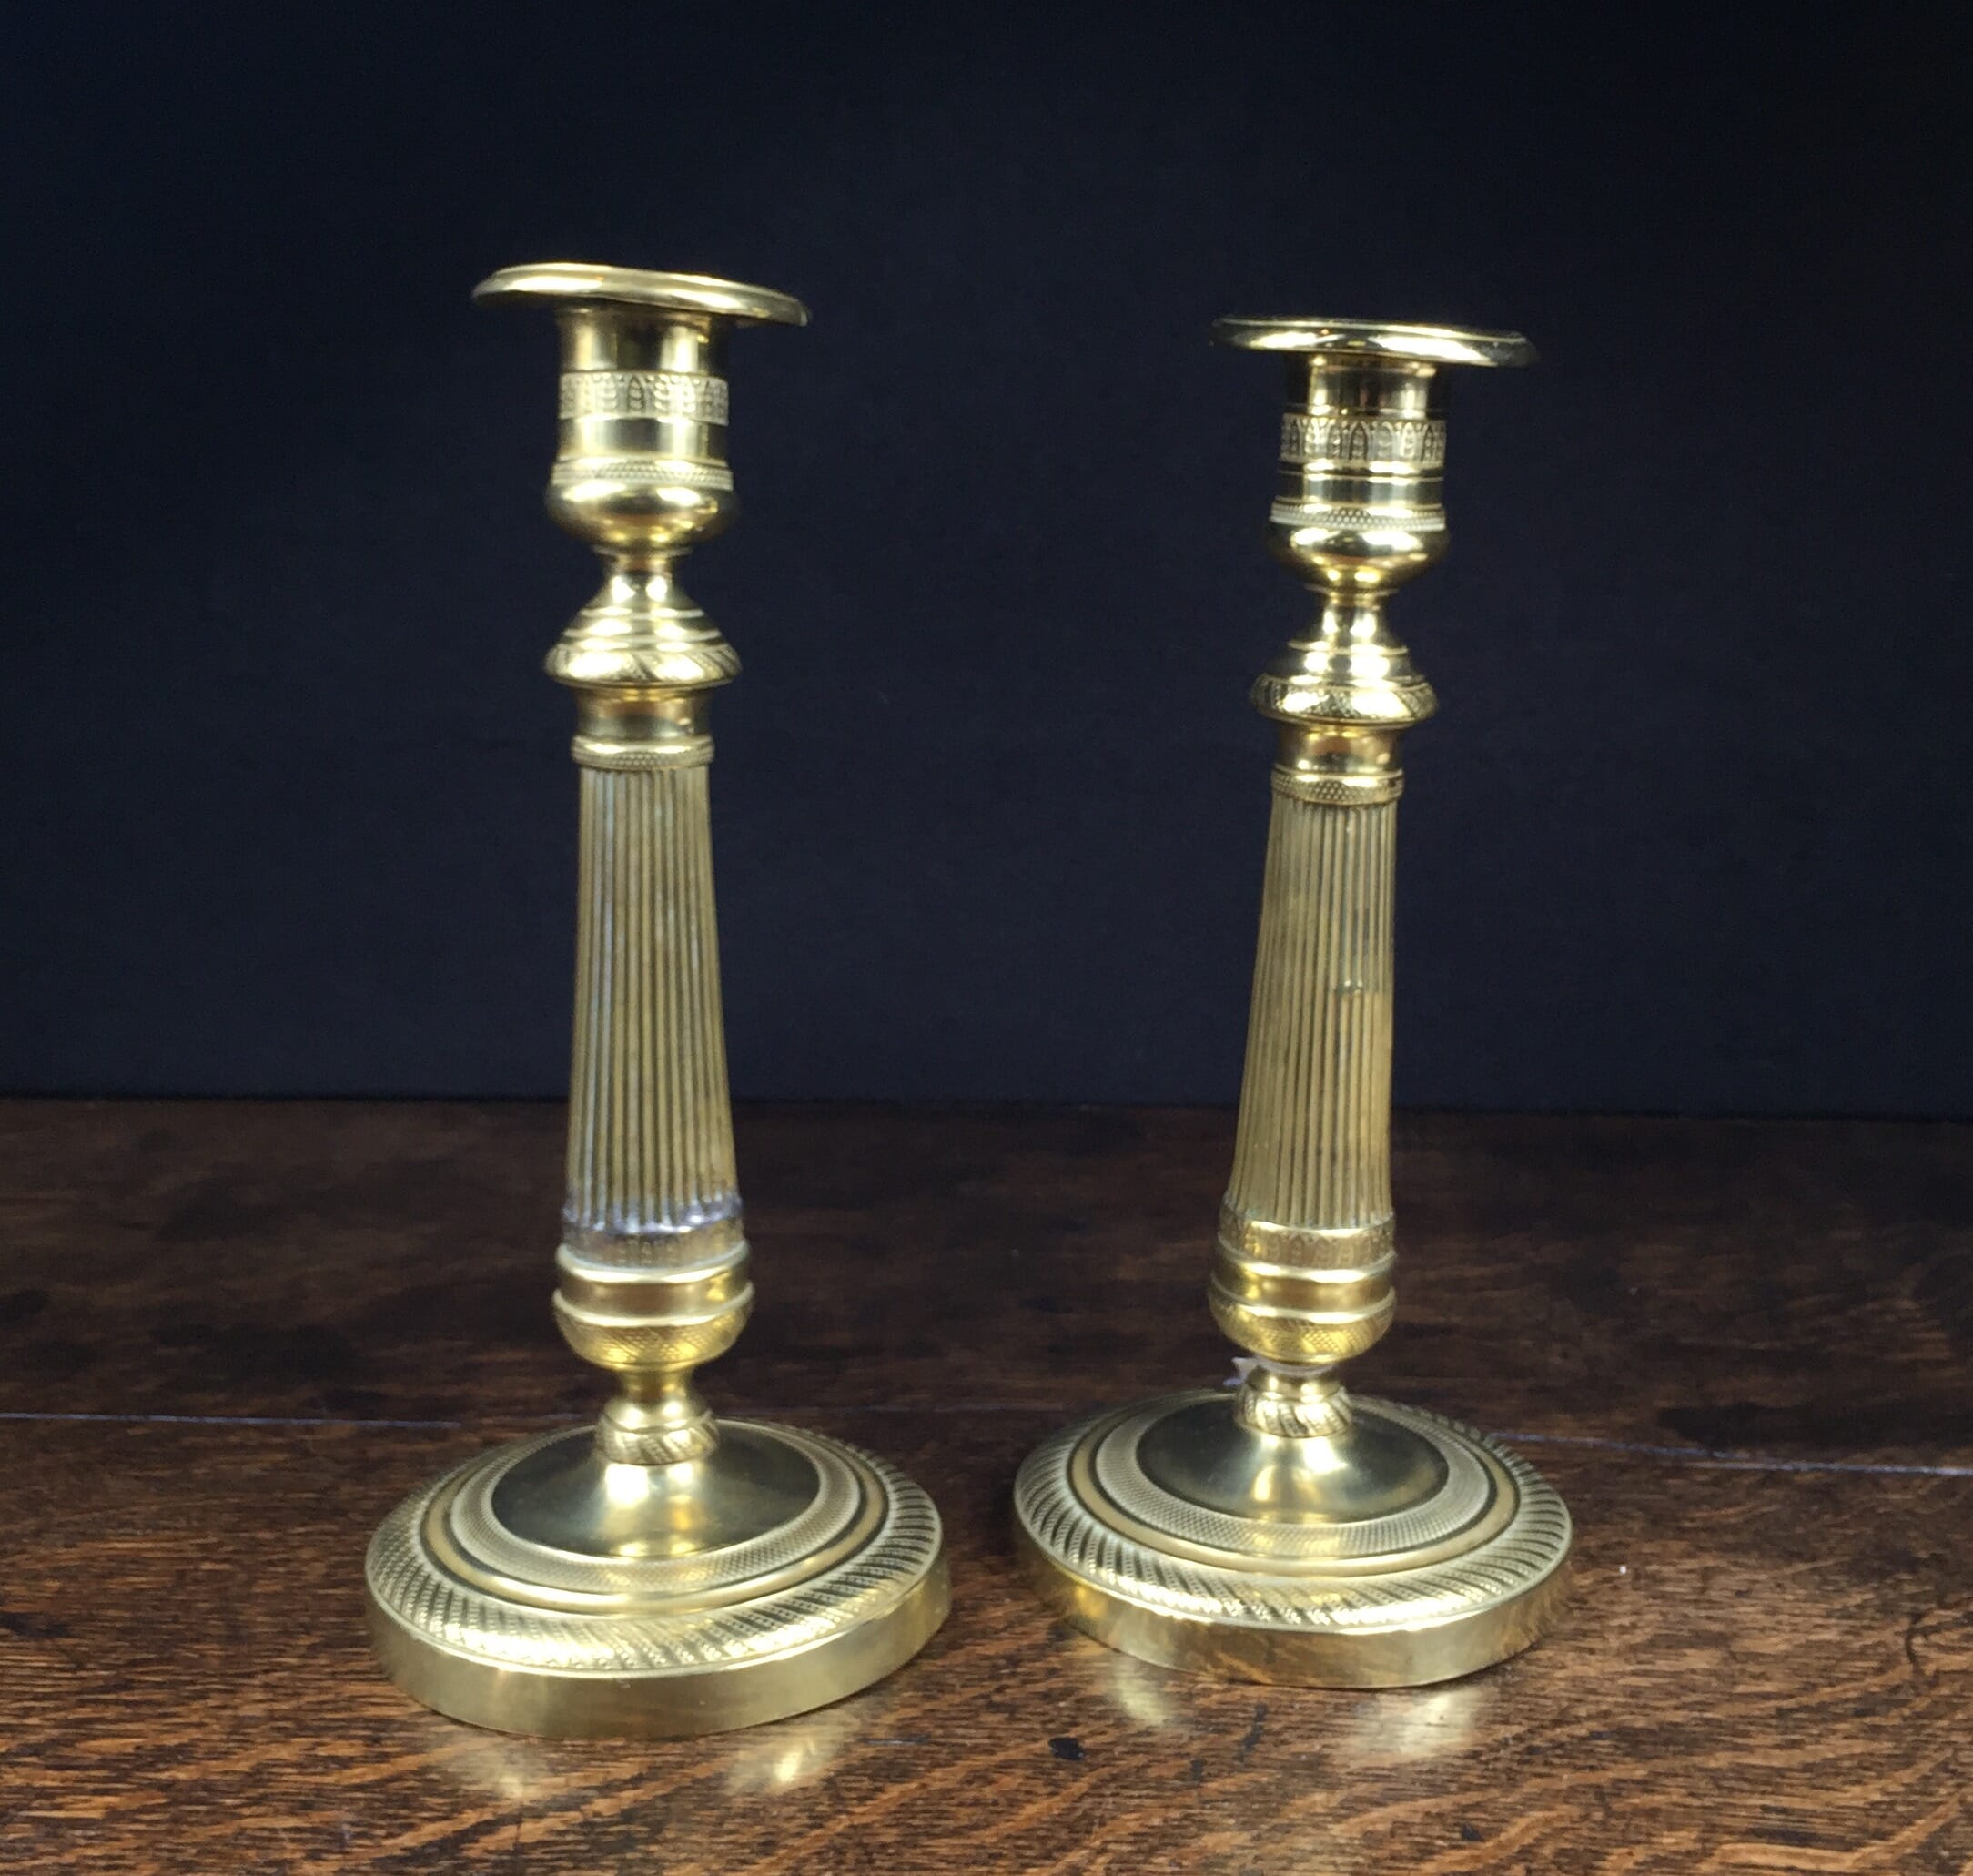 Pair of French brass candlesticks, fluted columns, earlier 19th